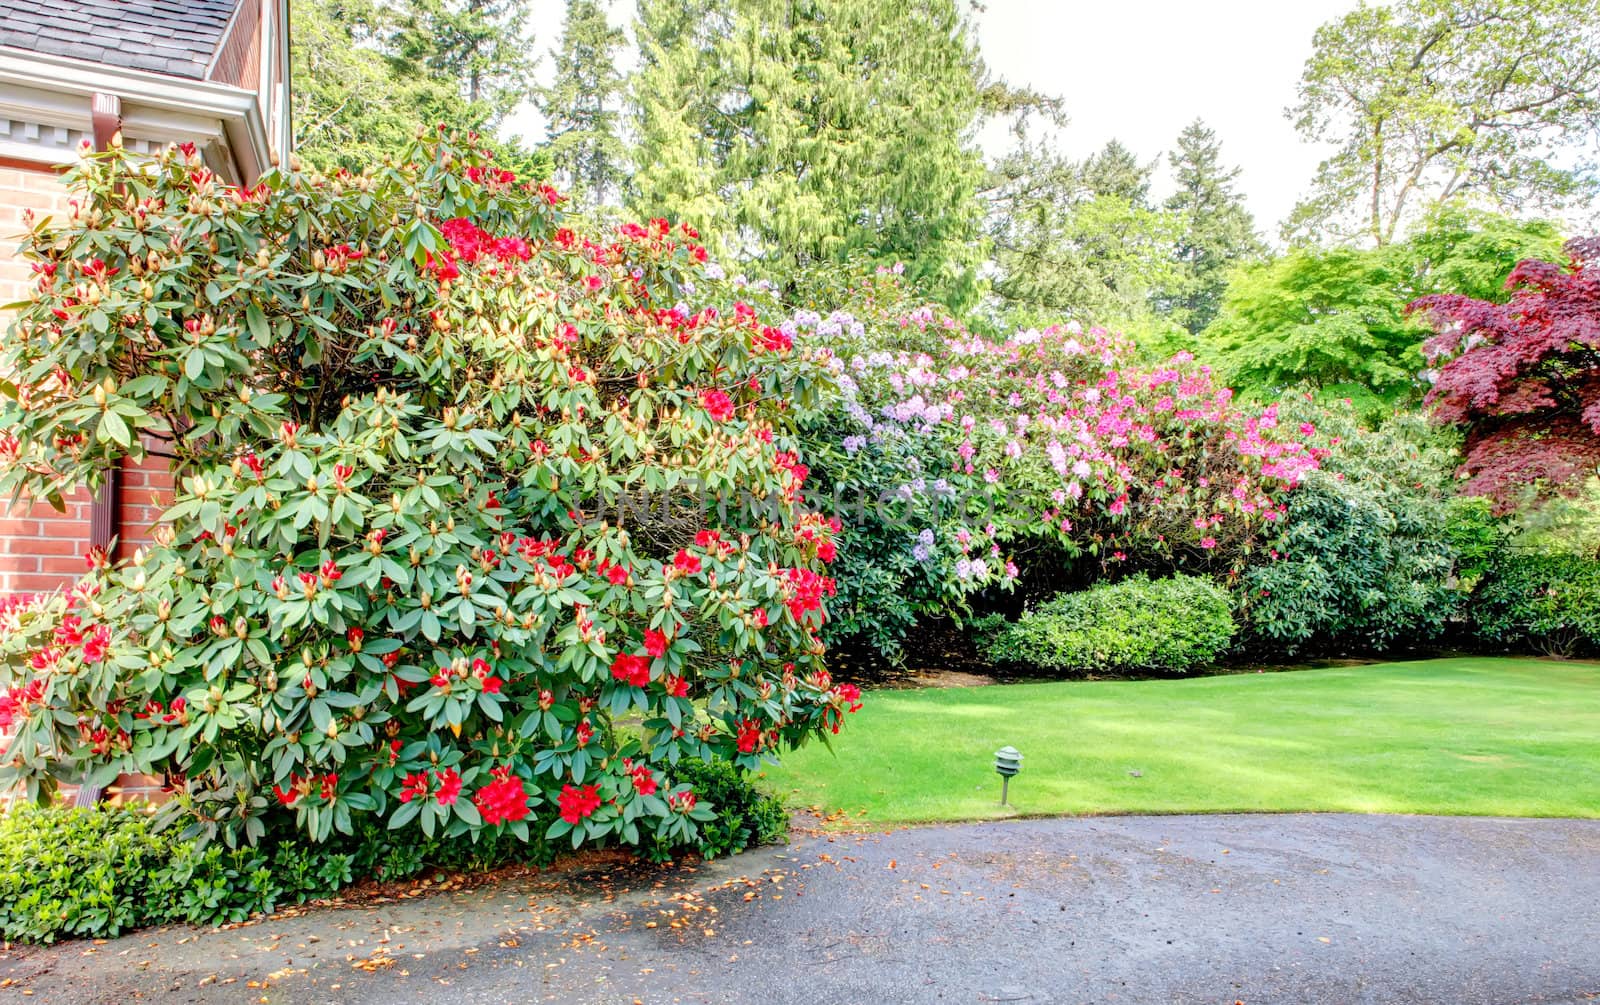 Large bushes of rhododendrons in colorful bloom. Northwest, end of May.